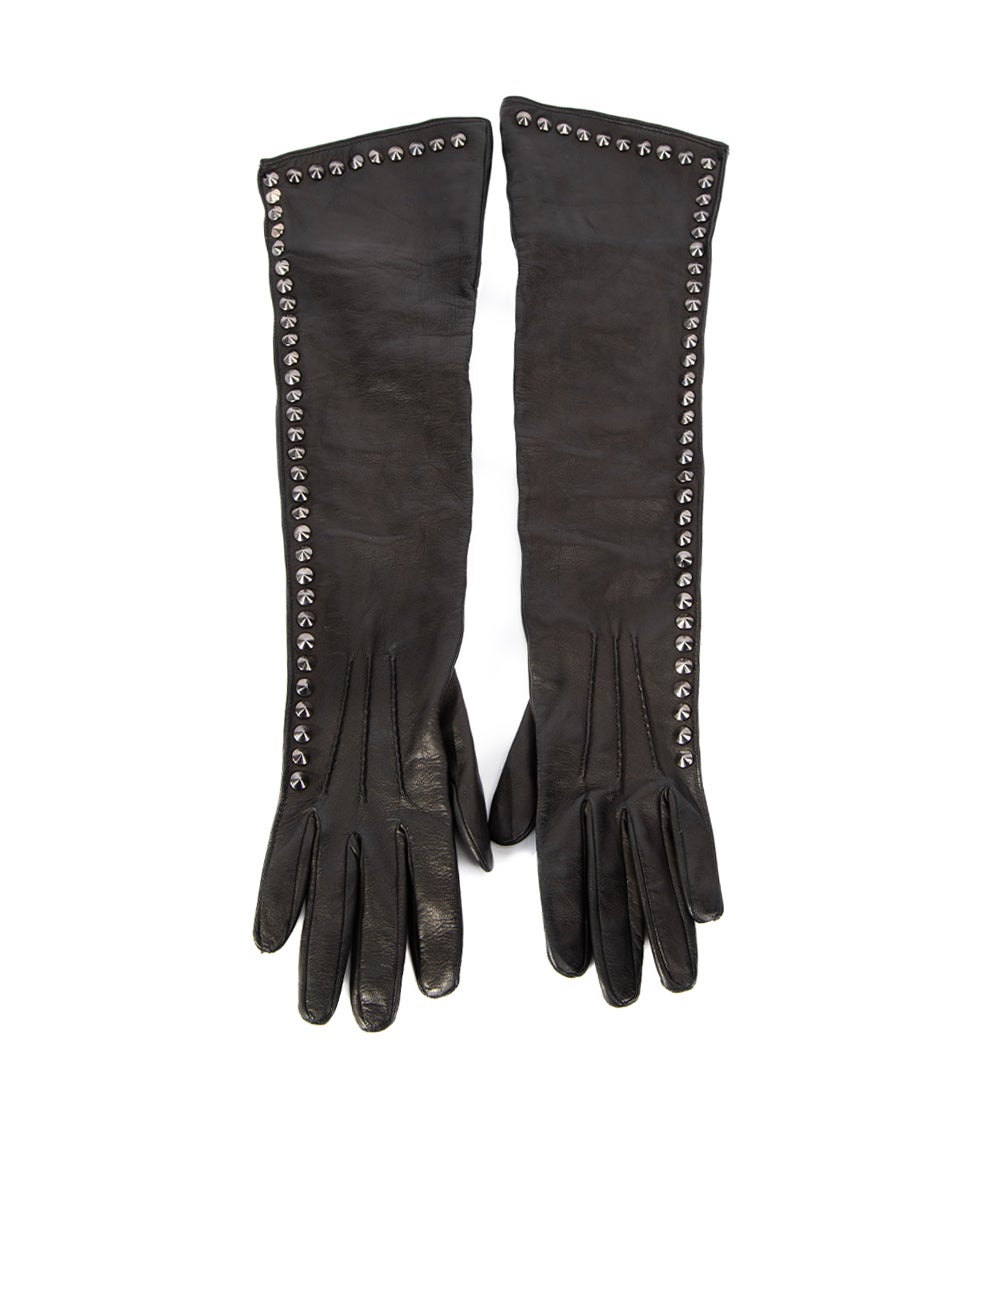 Burberry Women's Black Leather Studded Elbow Gloves